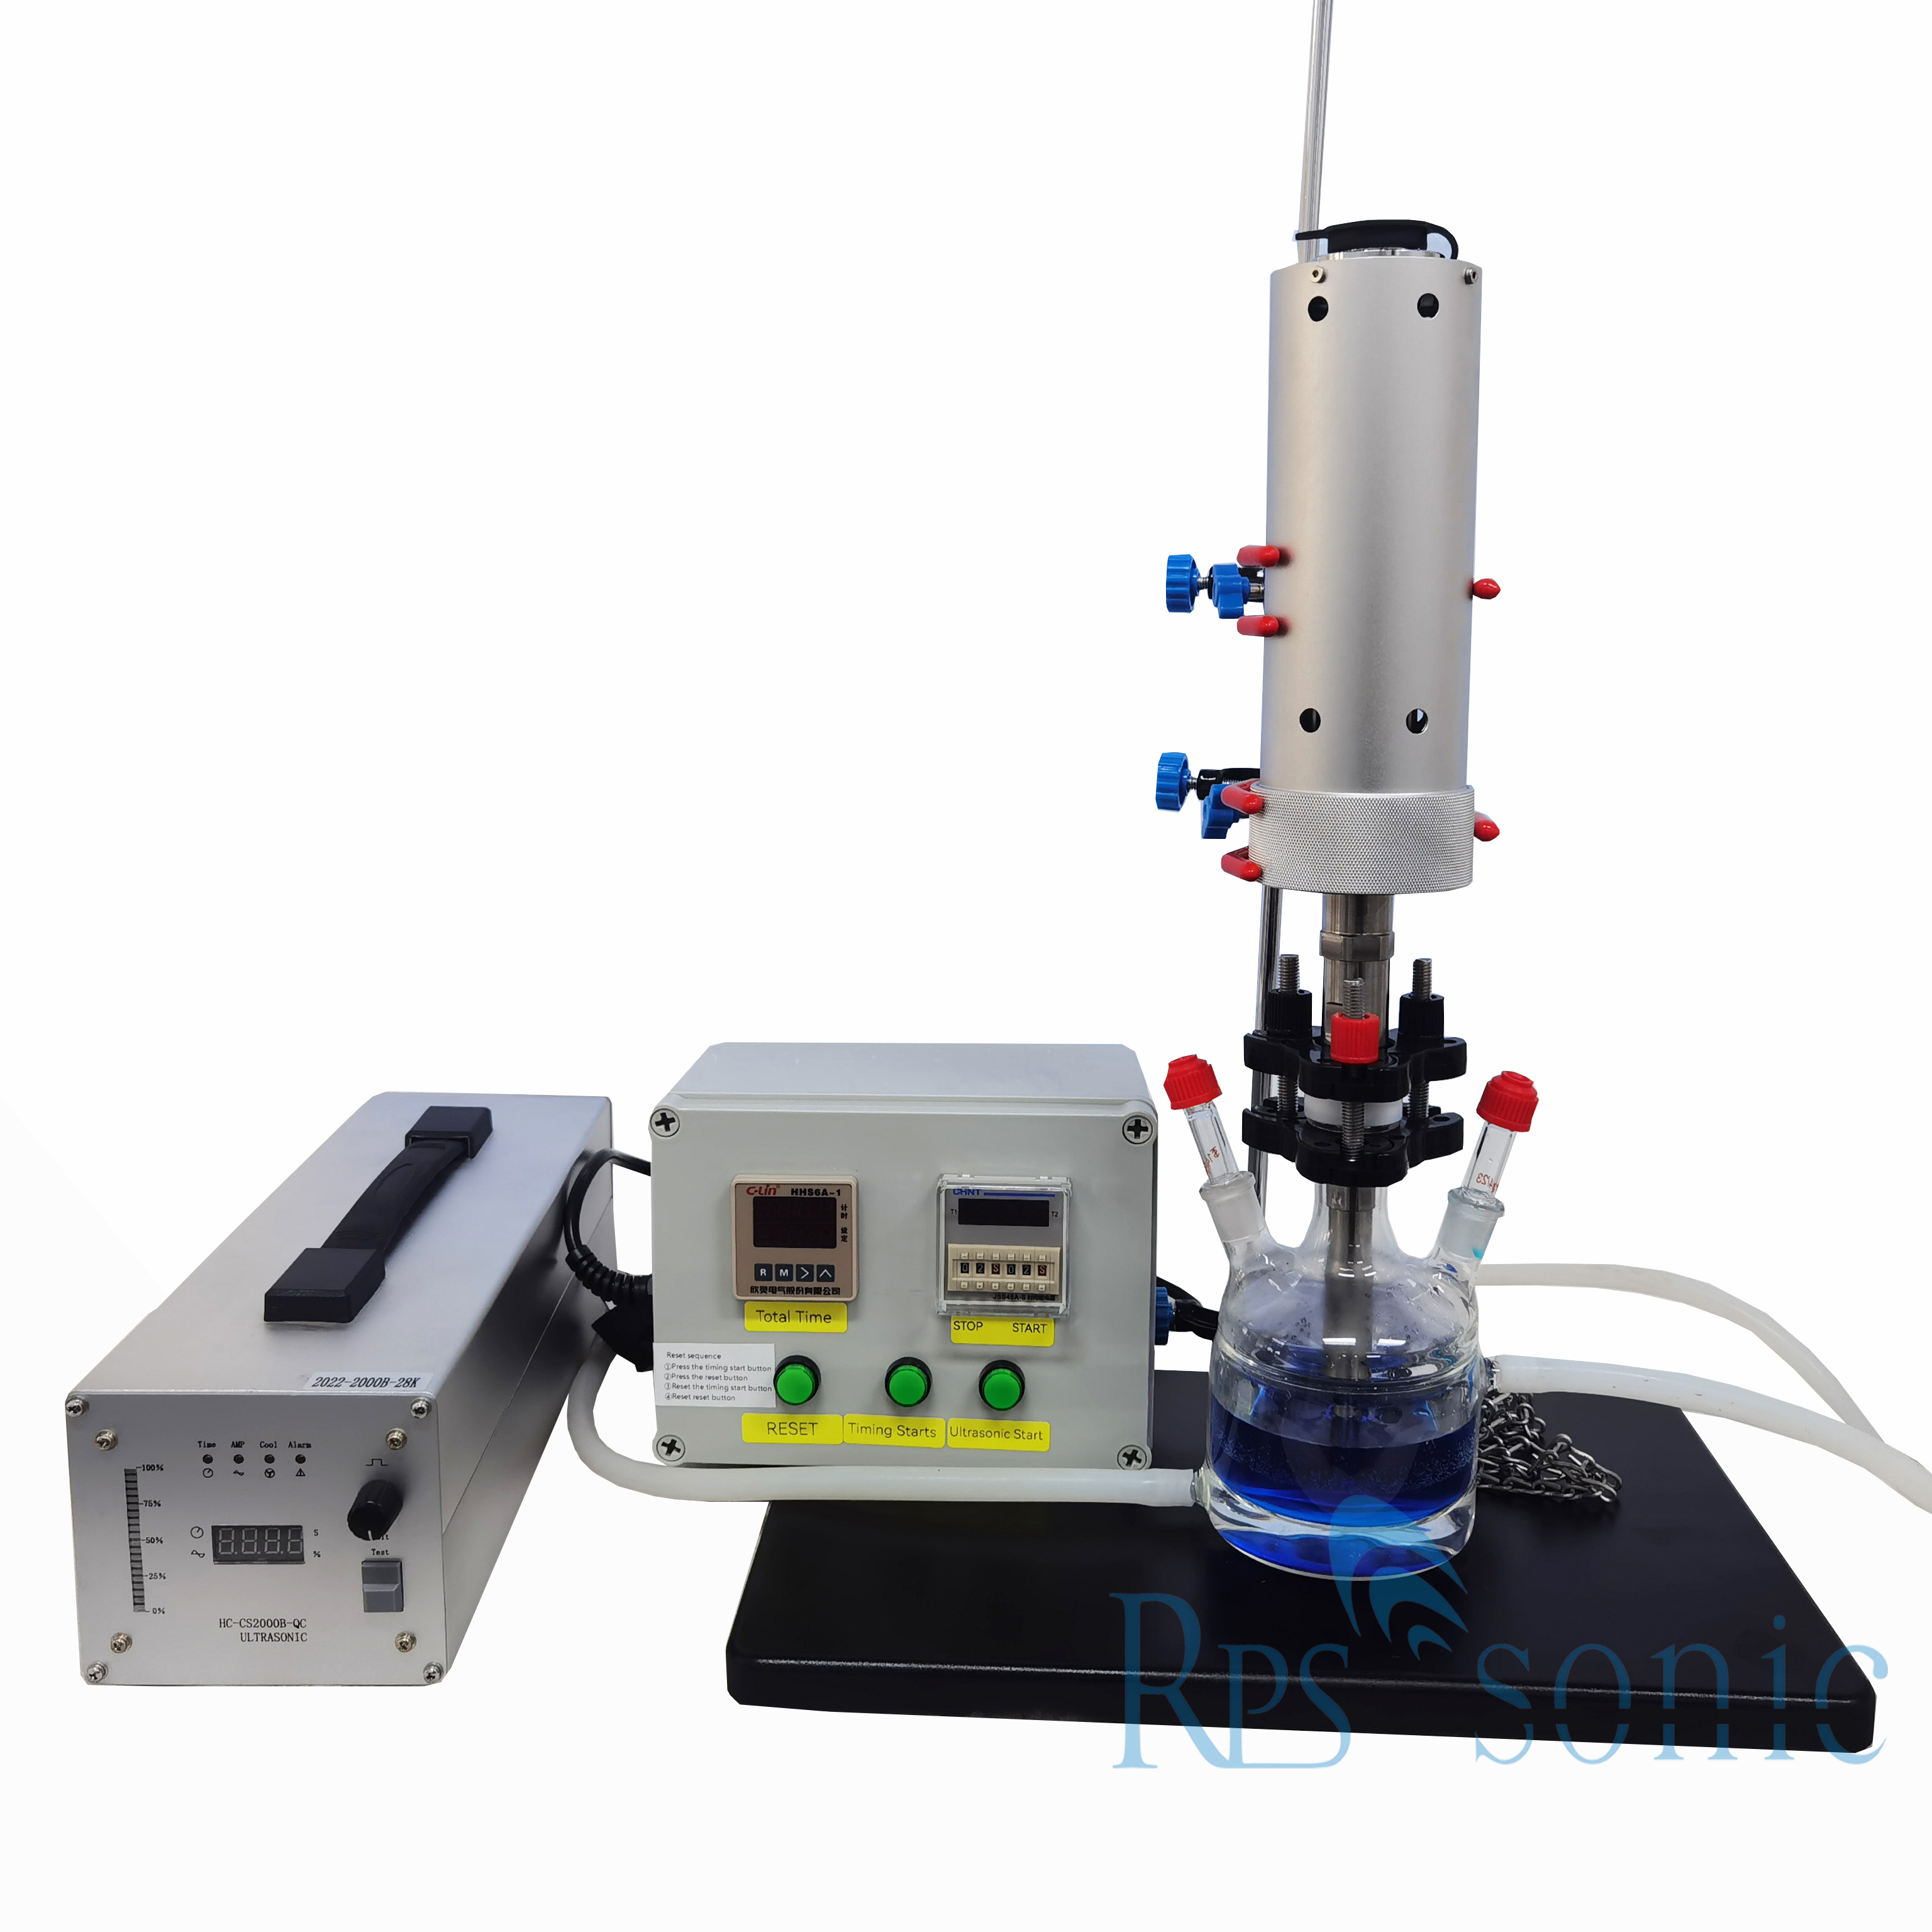 Laboratory digital ultrasonic sonicator with temperature controller for ultrasonic extracting/mixing Featured Image